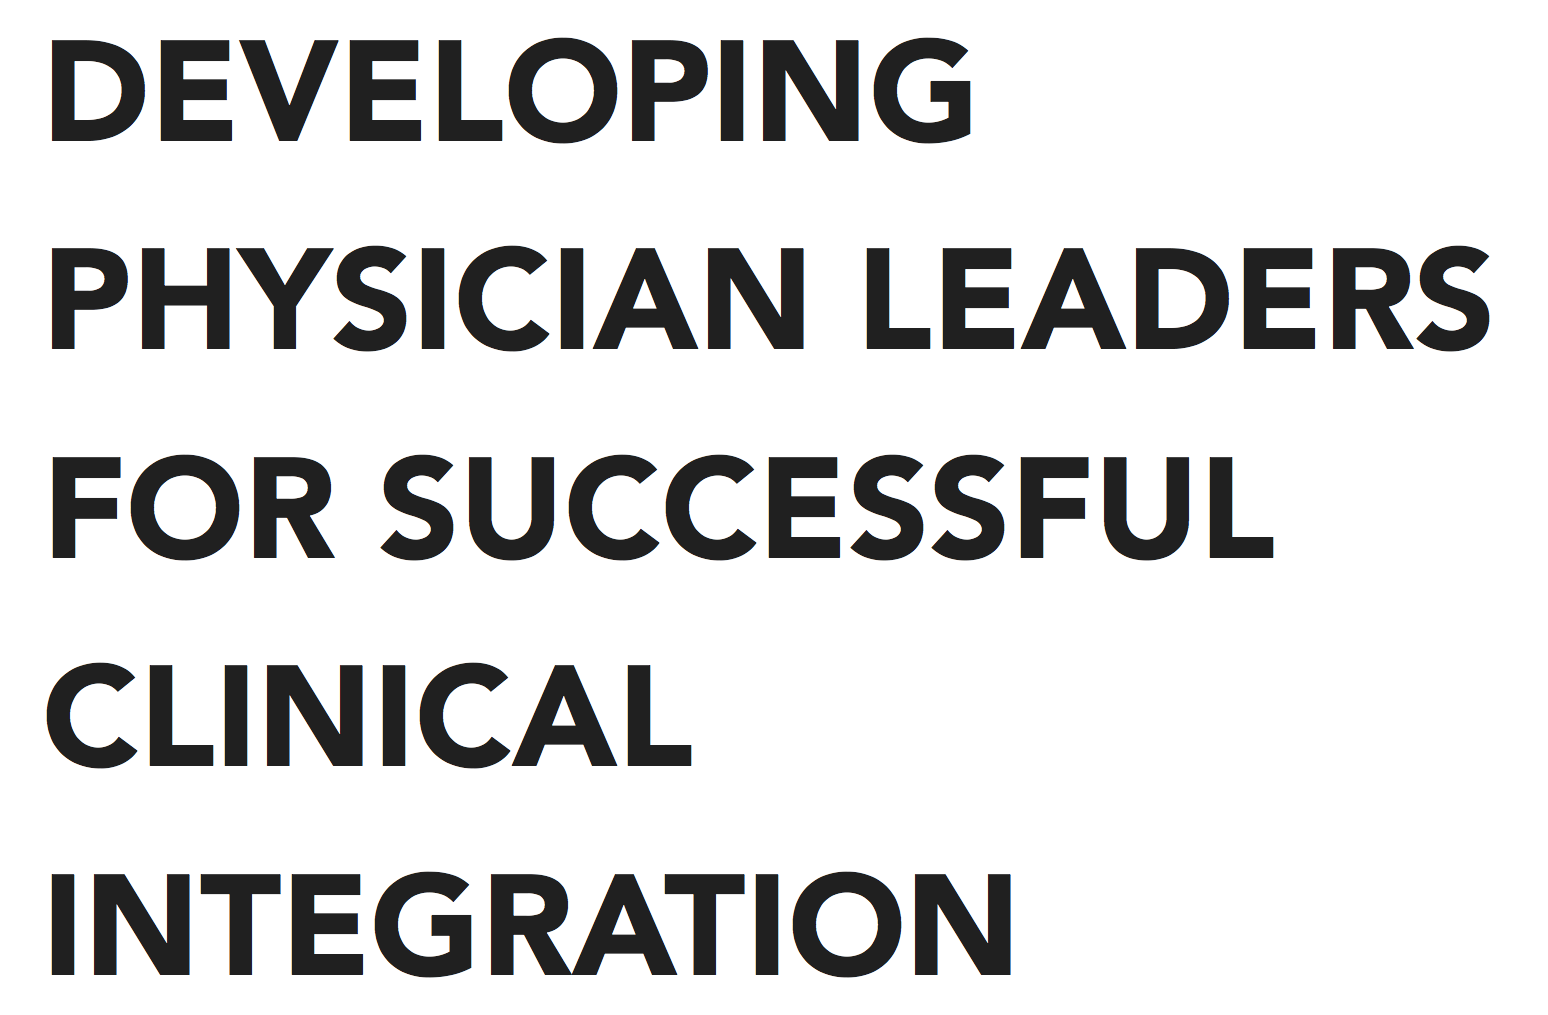 Developing physician leaders for successful clinical integration - Chapter 12: How to Assess and Select Physician Leaders